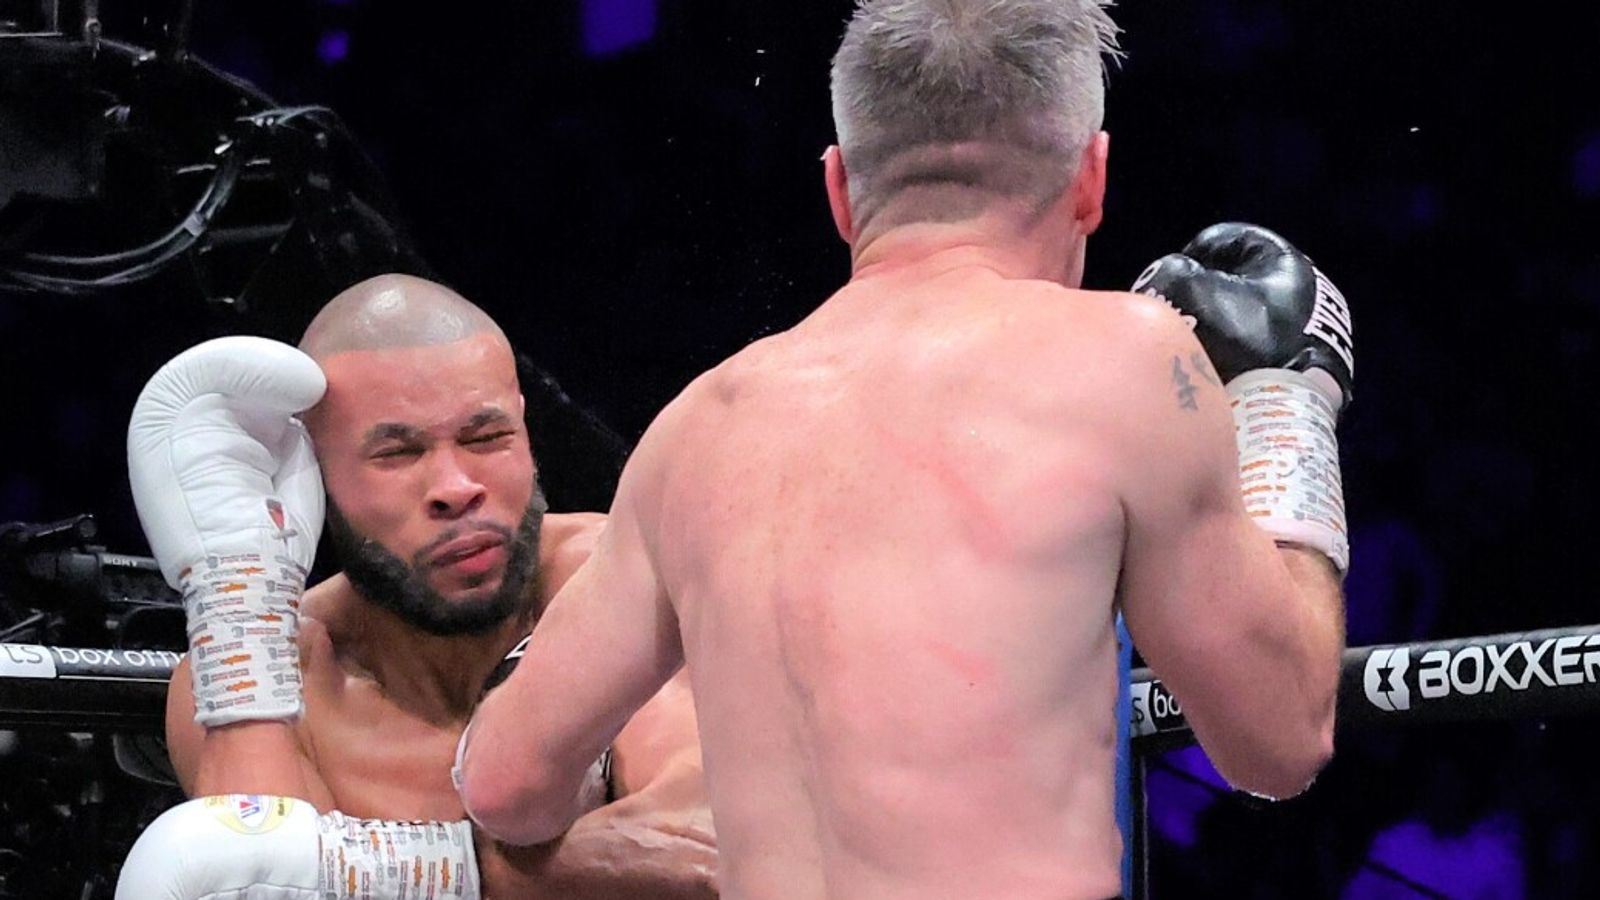 Chris Eubank Jr's team are considering an appeal with the BBBofC over alleged elbow from Liam Smith in knockout win